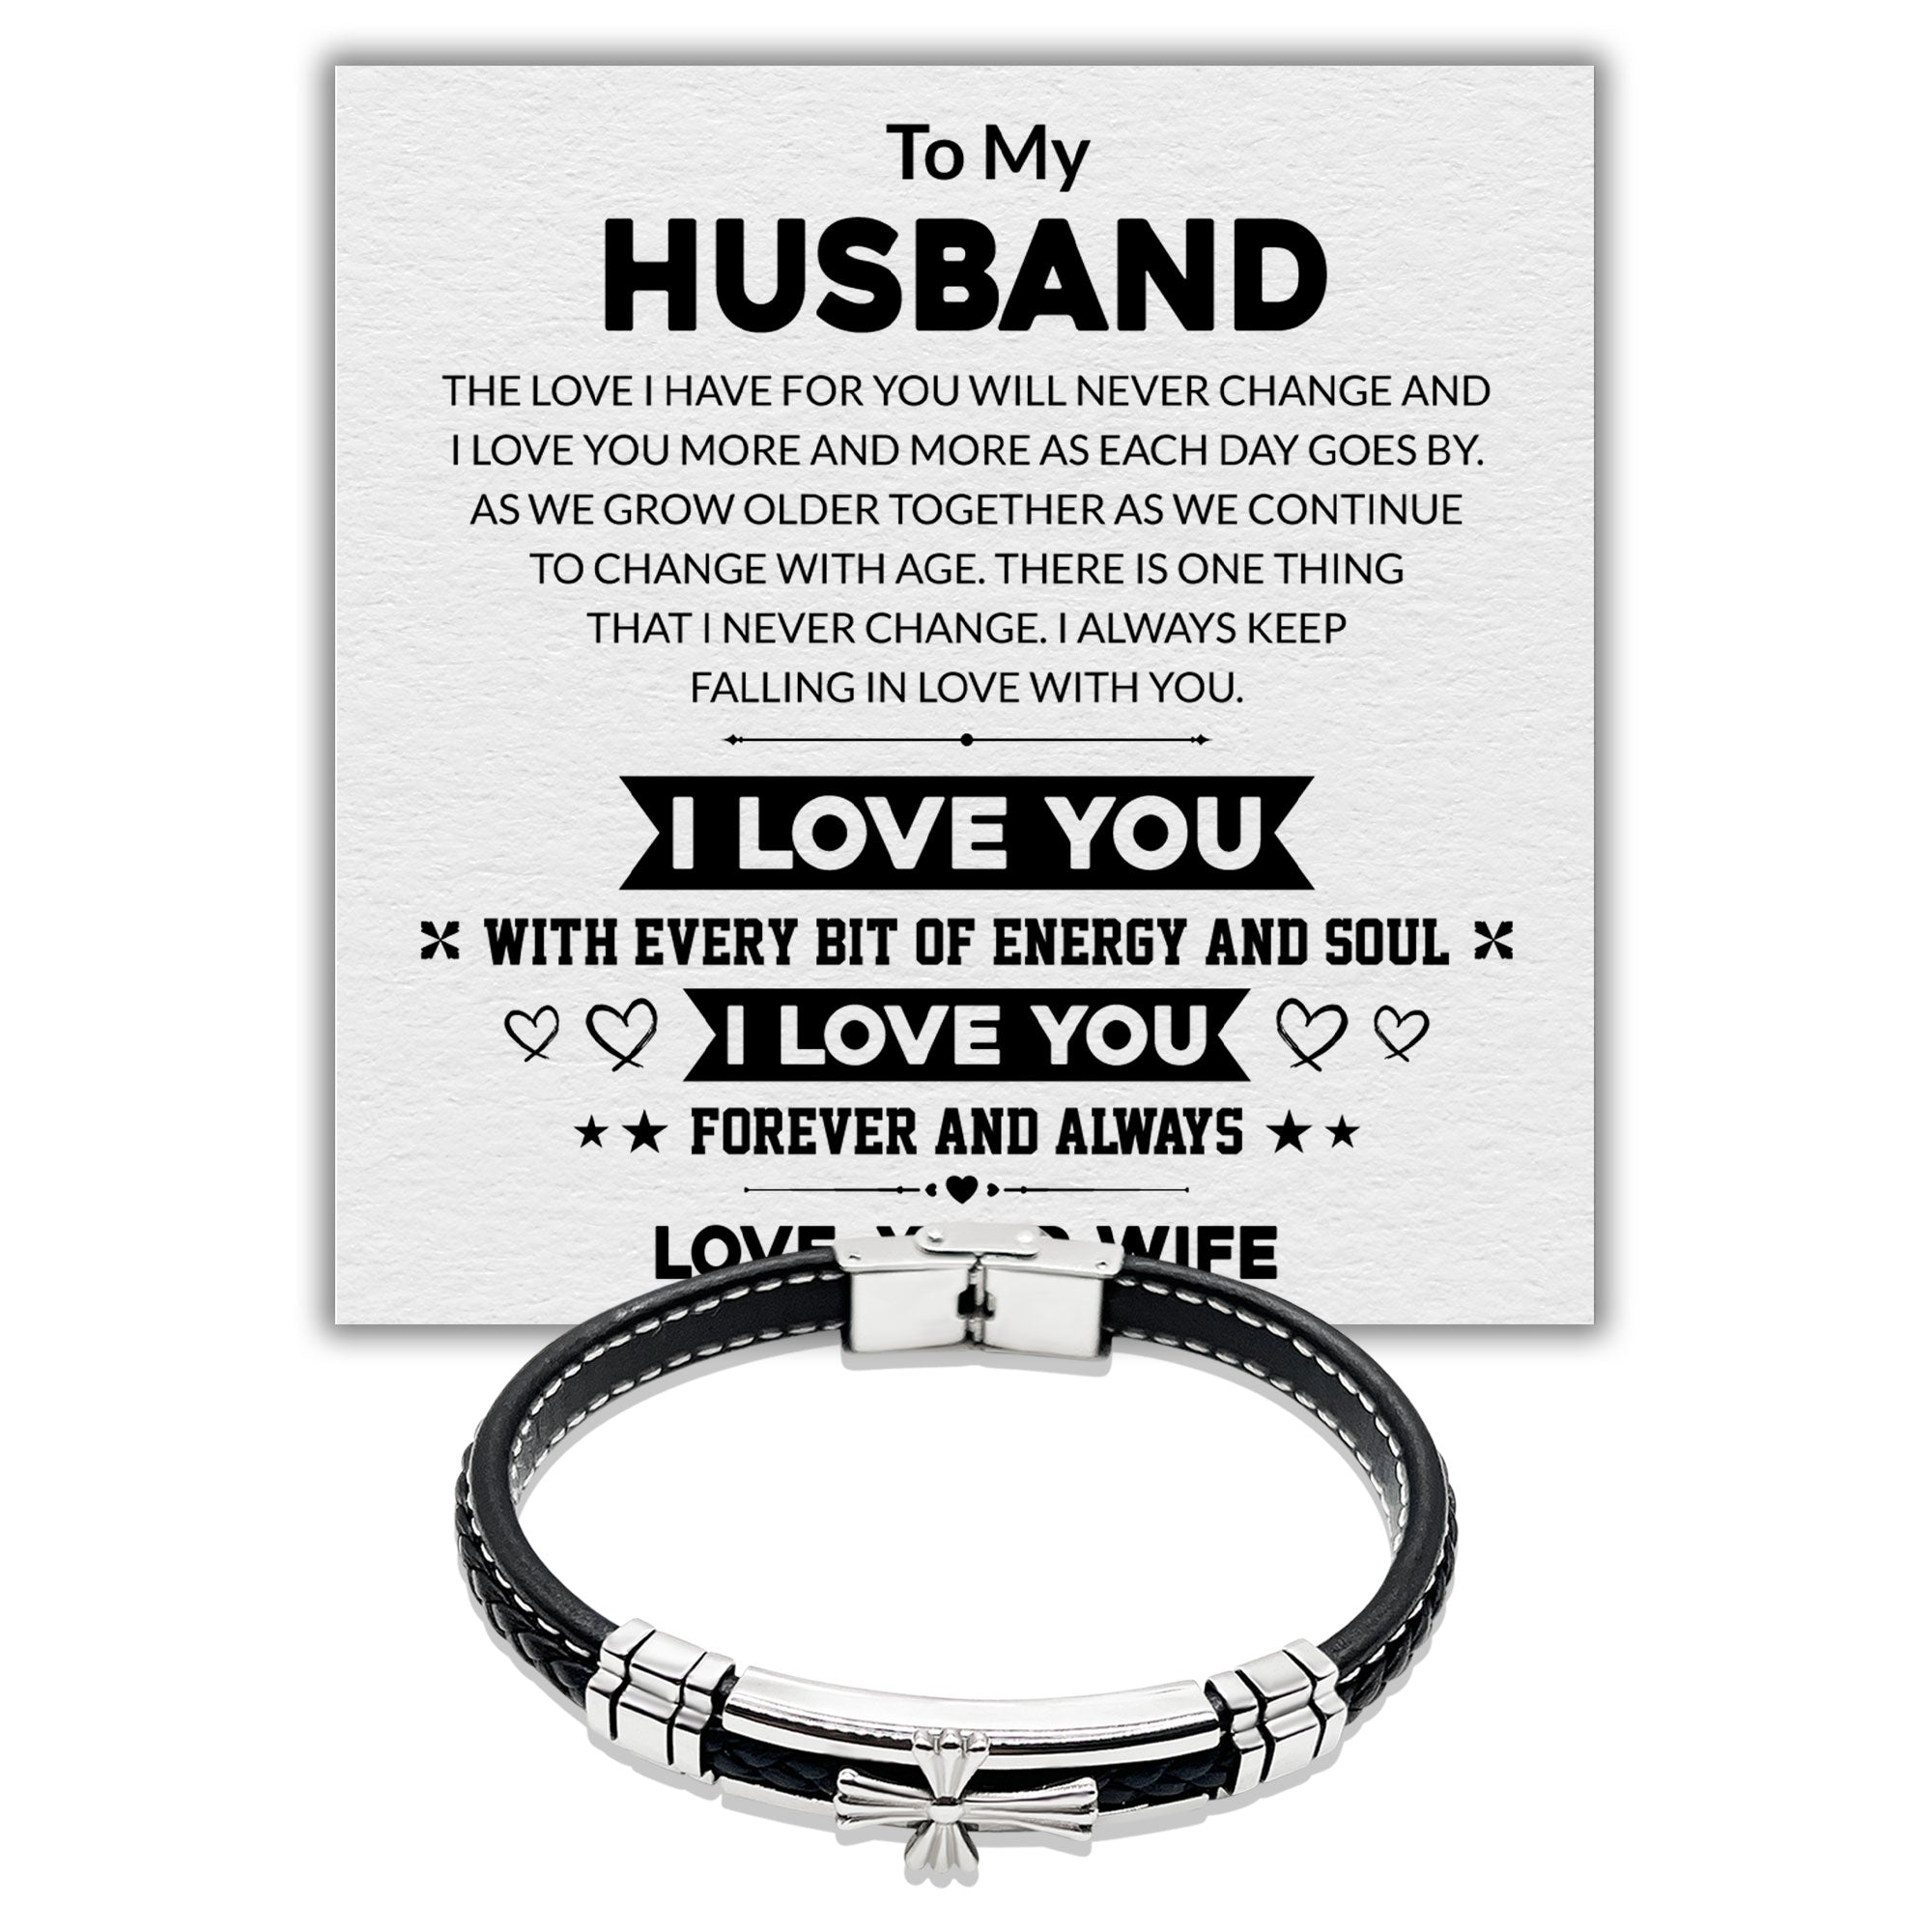 To my Husband I Love You Forever and Always - Premium Stainless Steel Celtic Cross Black Italian Leather Bracelet